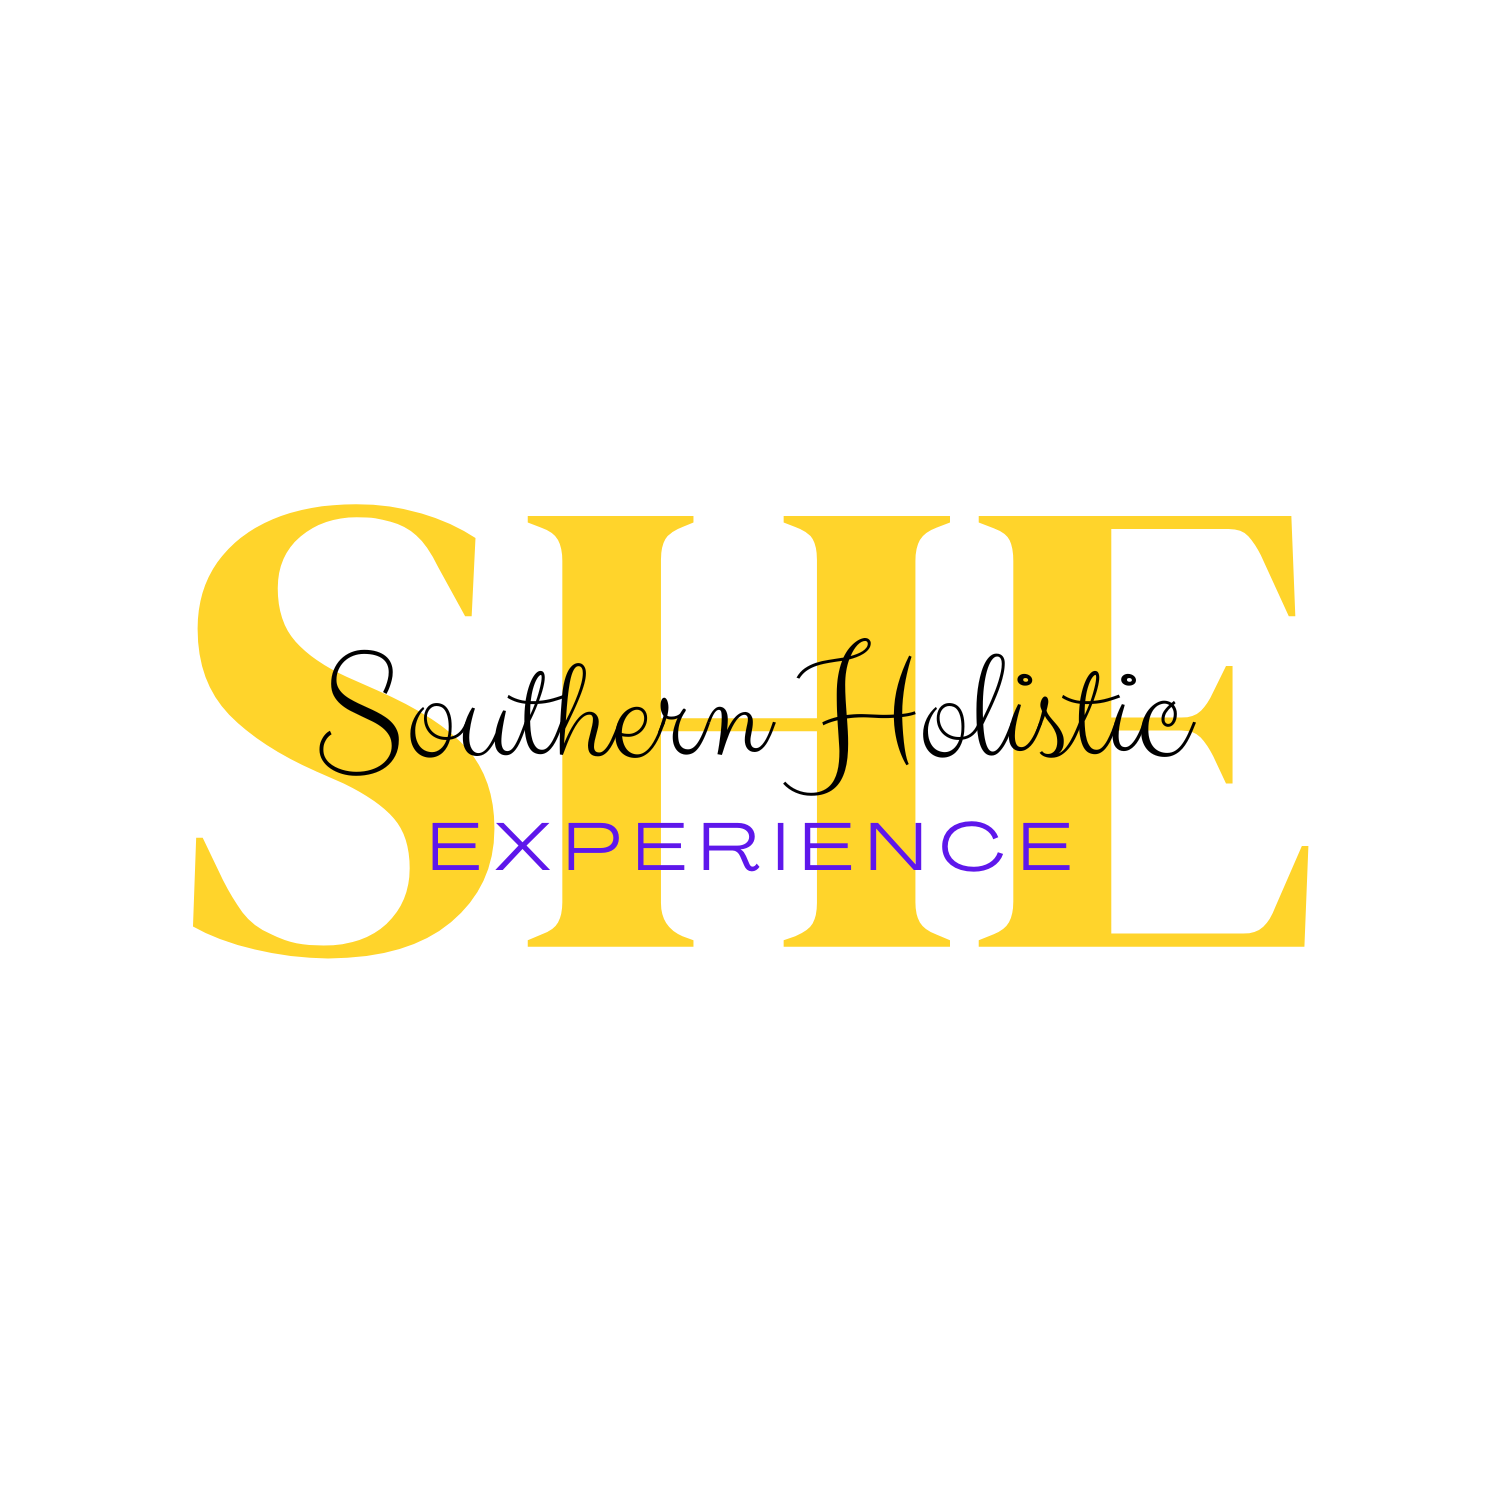 Southern holistic Experiences